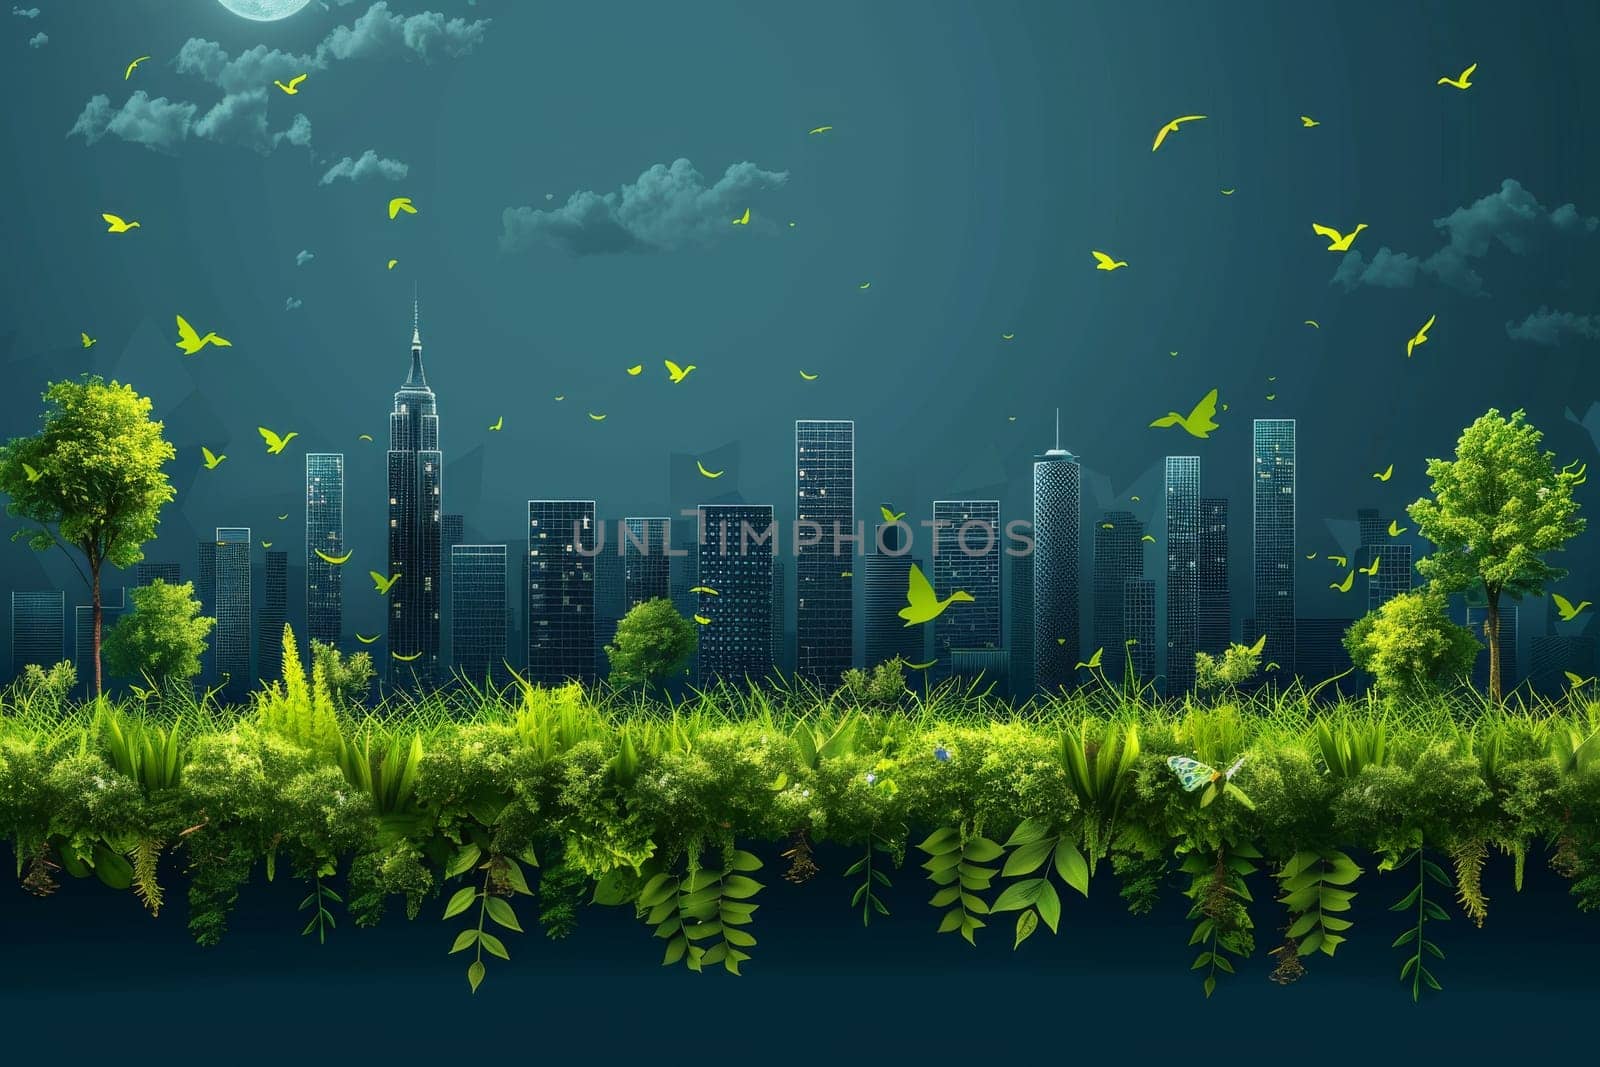 Green clean, Renewable, Sustainable energy concept. Solar panel background.